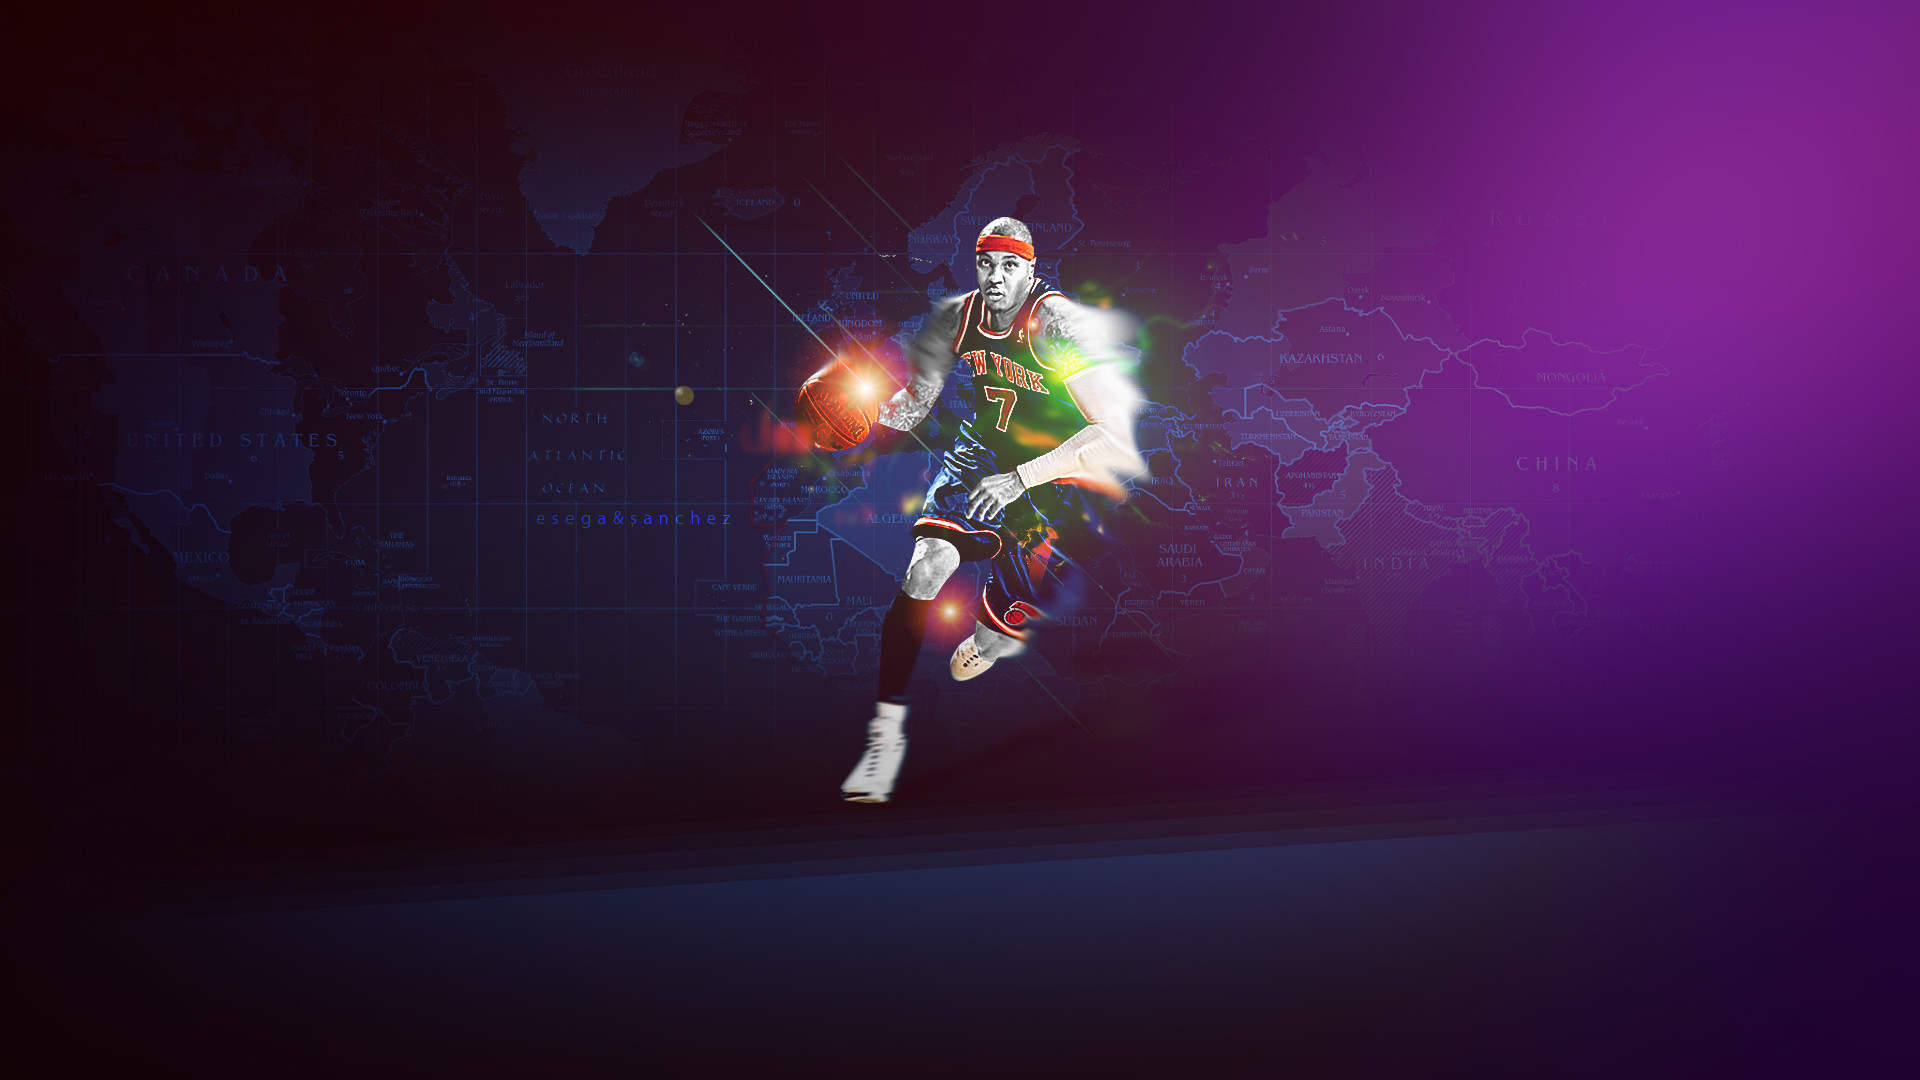 1920x1080 Carmelo Anthony Wallpaper by SanchezGraphic Carmelo Anthony Wallpaper by  SanchezGraphic